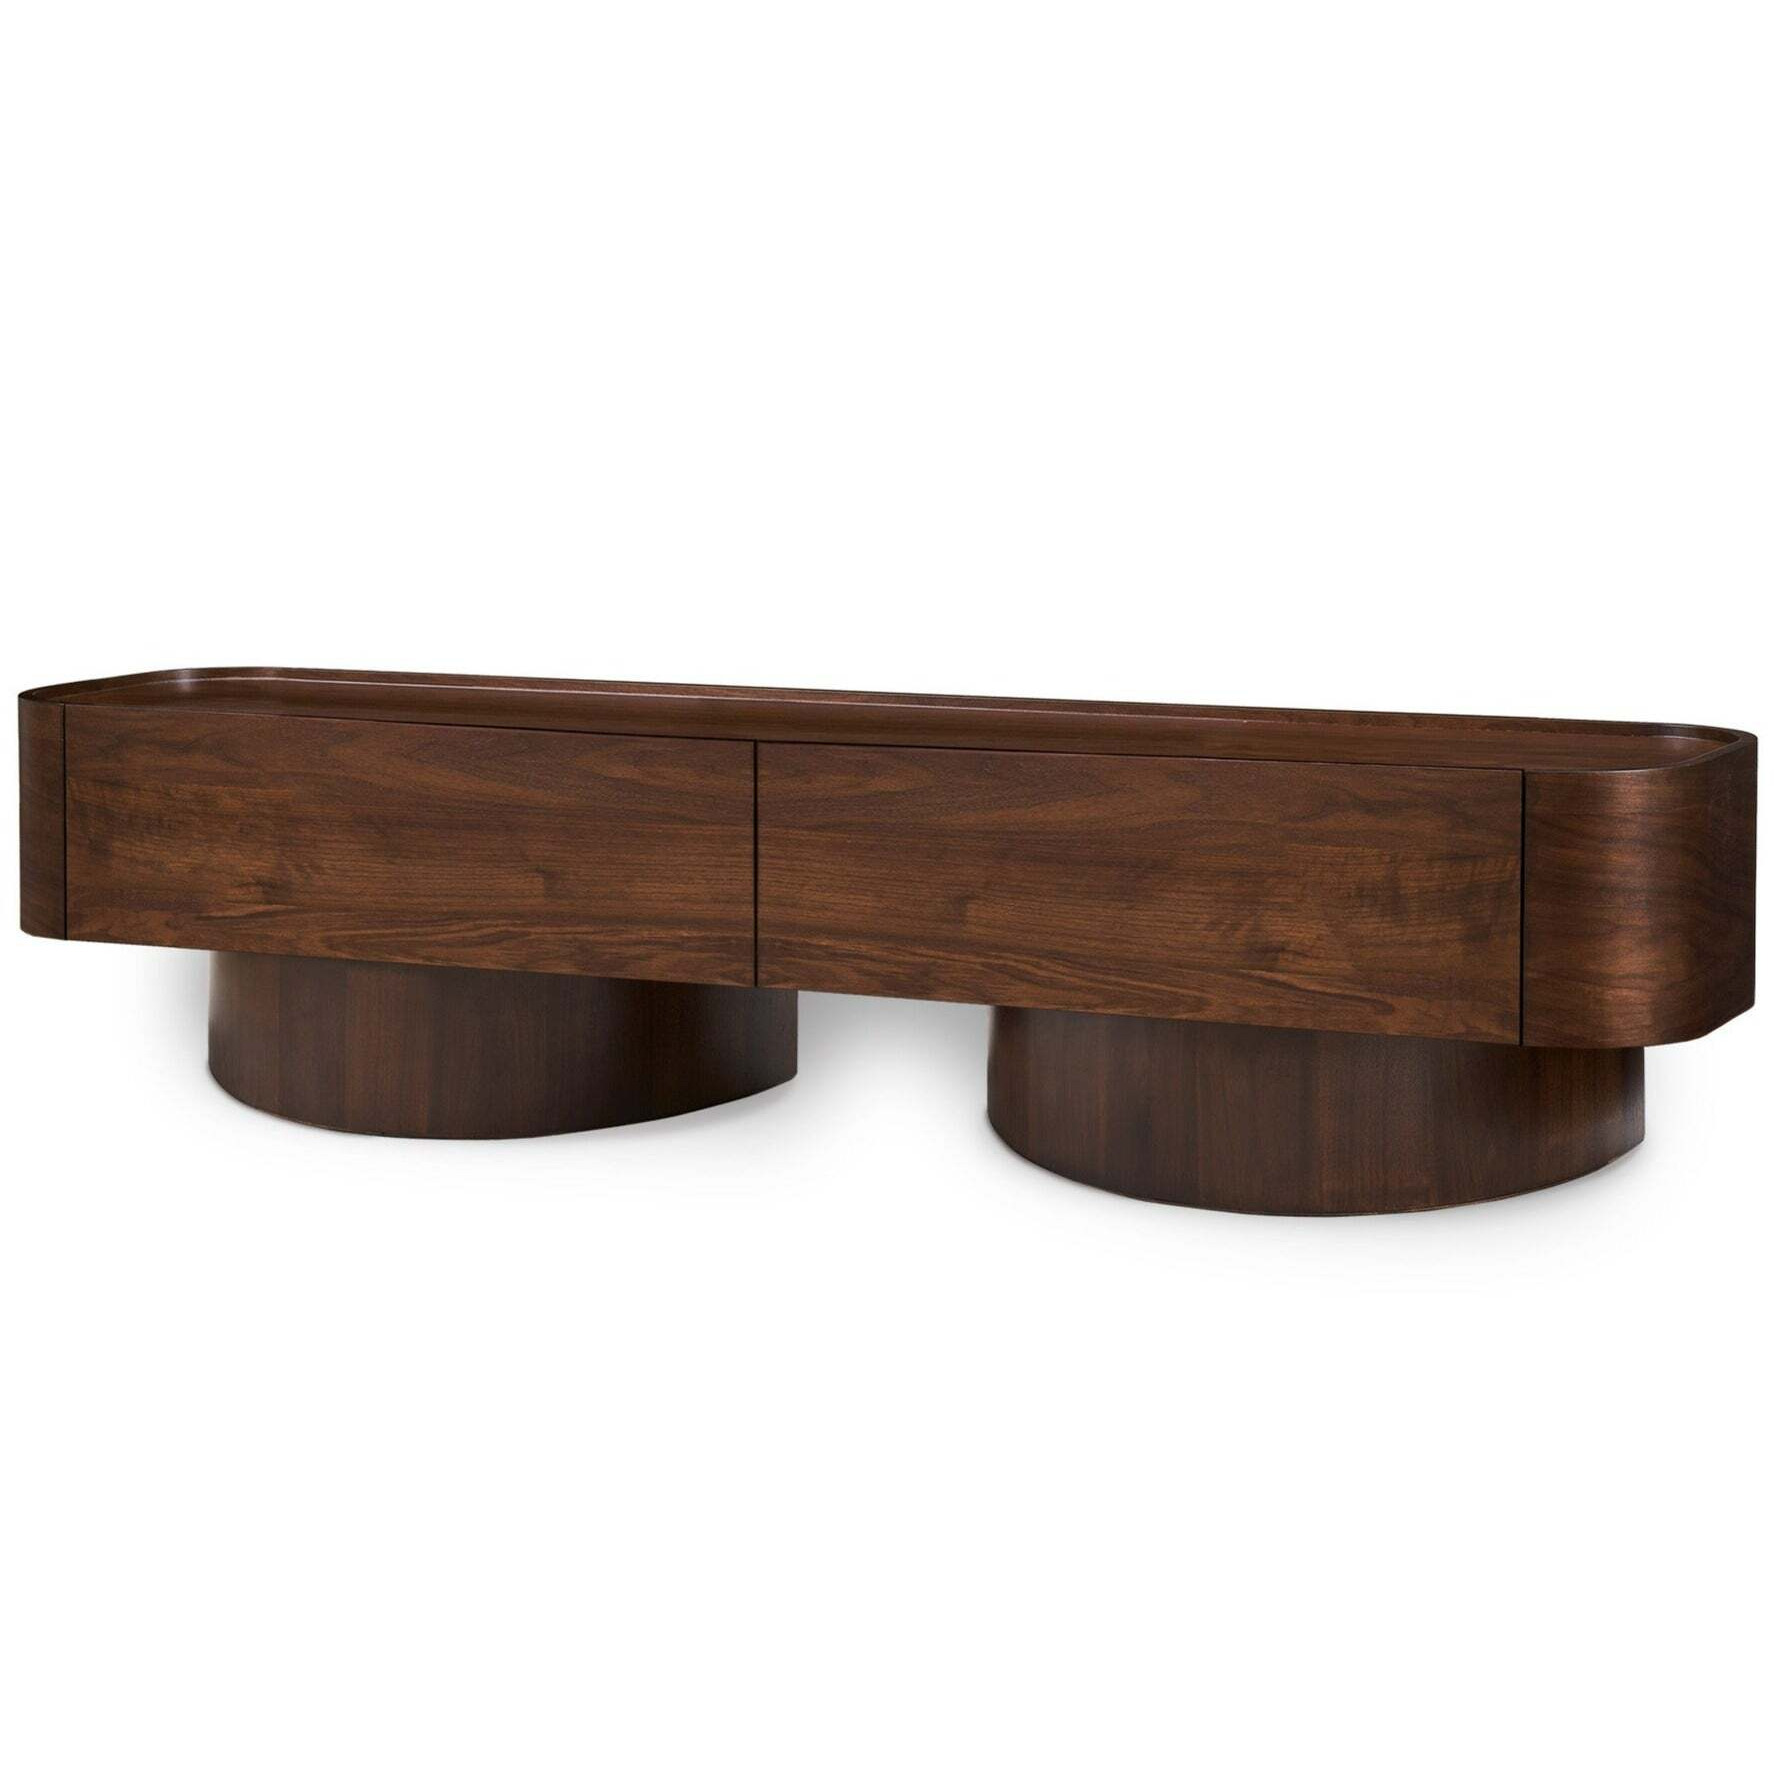 Liang & Eimil Butka Media Sideboard in Natural Walnut - image 1